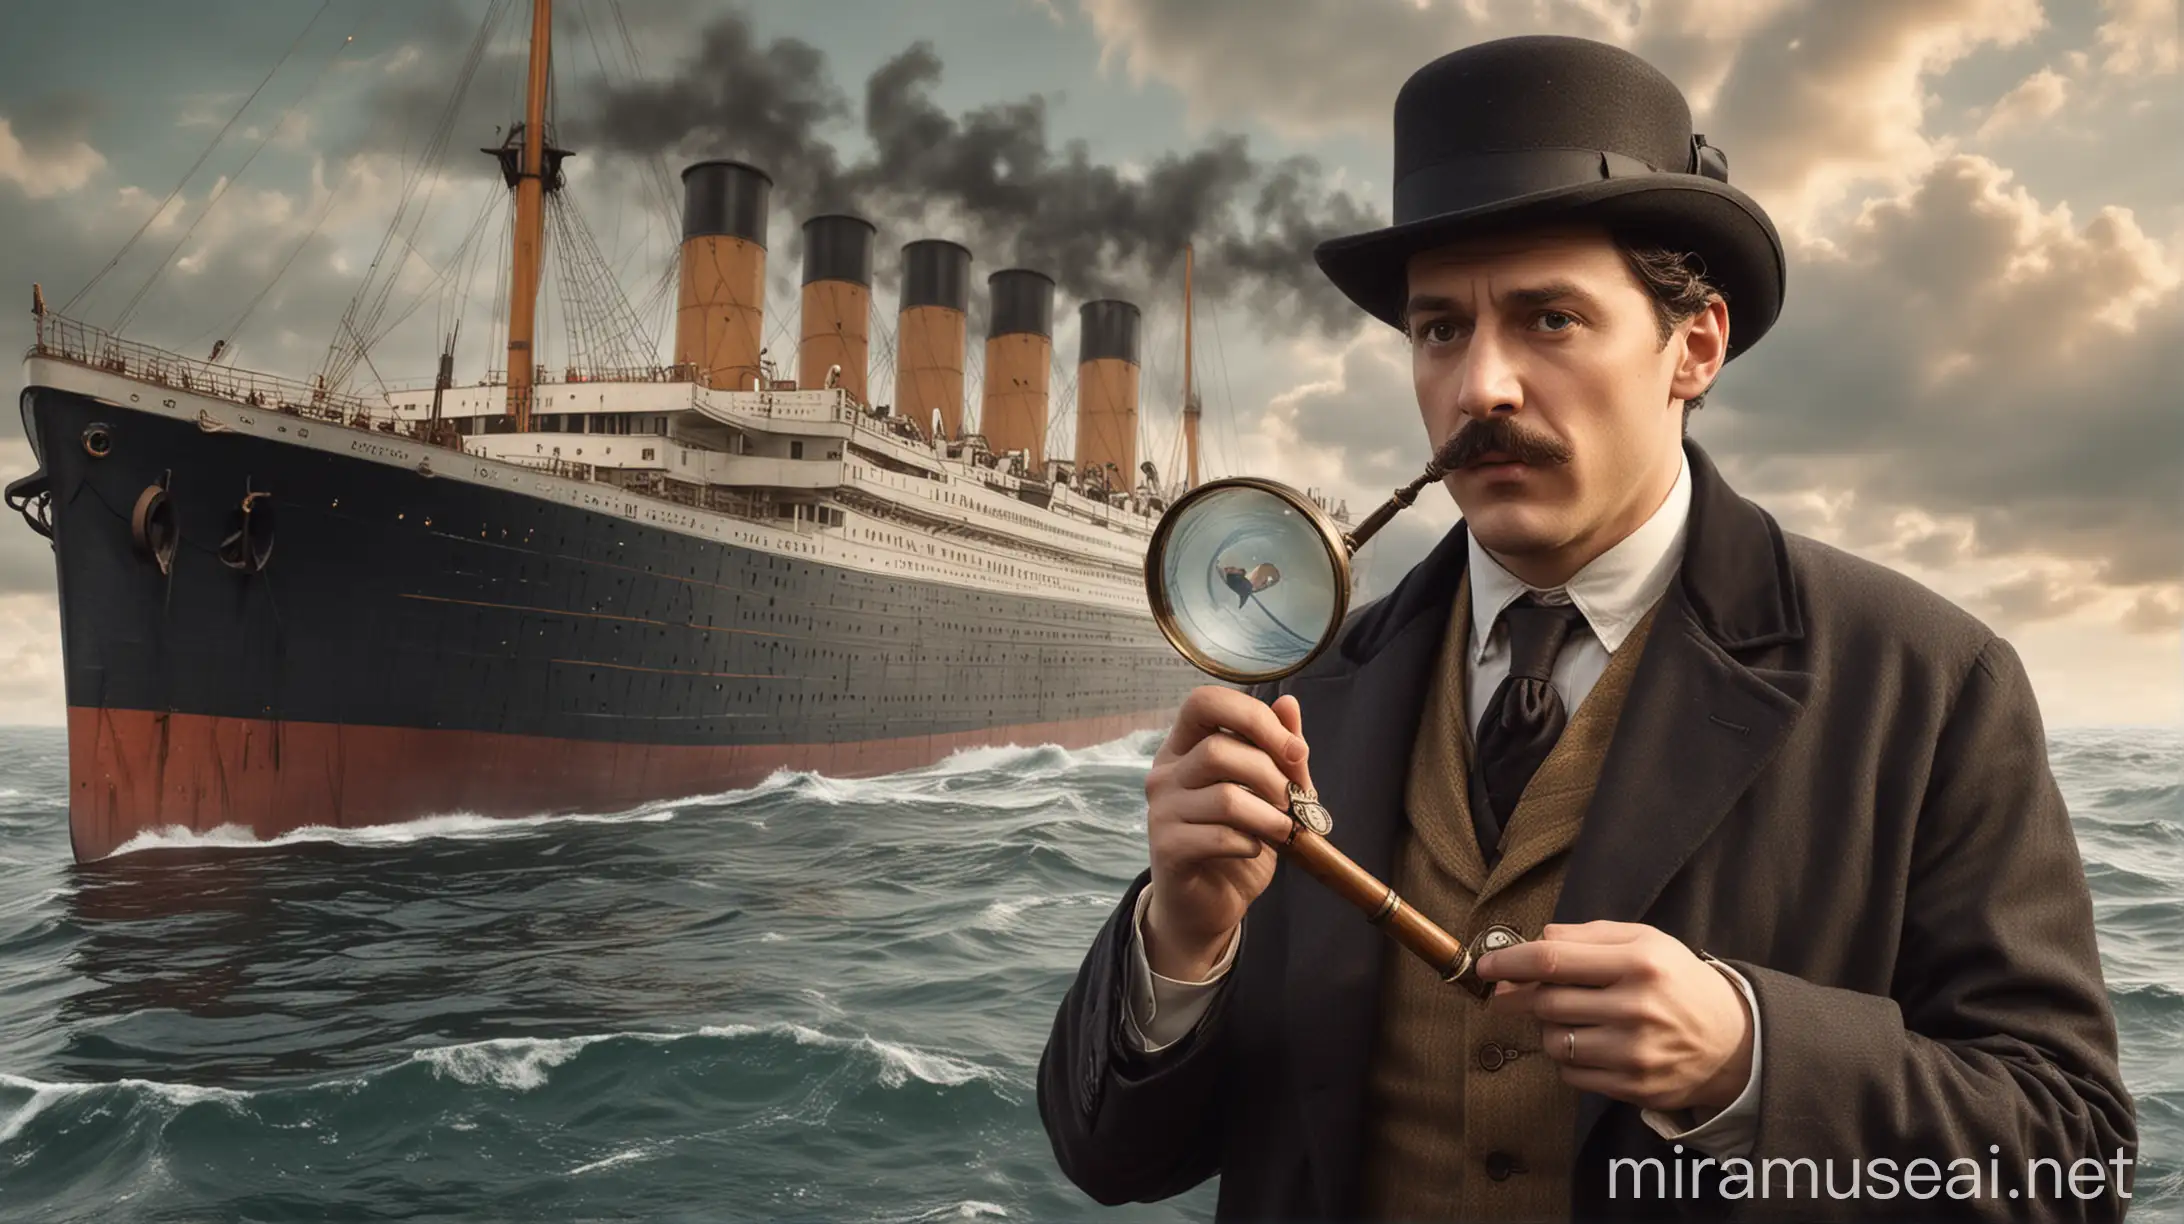 create e realistic image with in background the Titanic and in the foreground a bright sherlok holmes, dressed in his typycal dress, hanginh a magnyfier glass